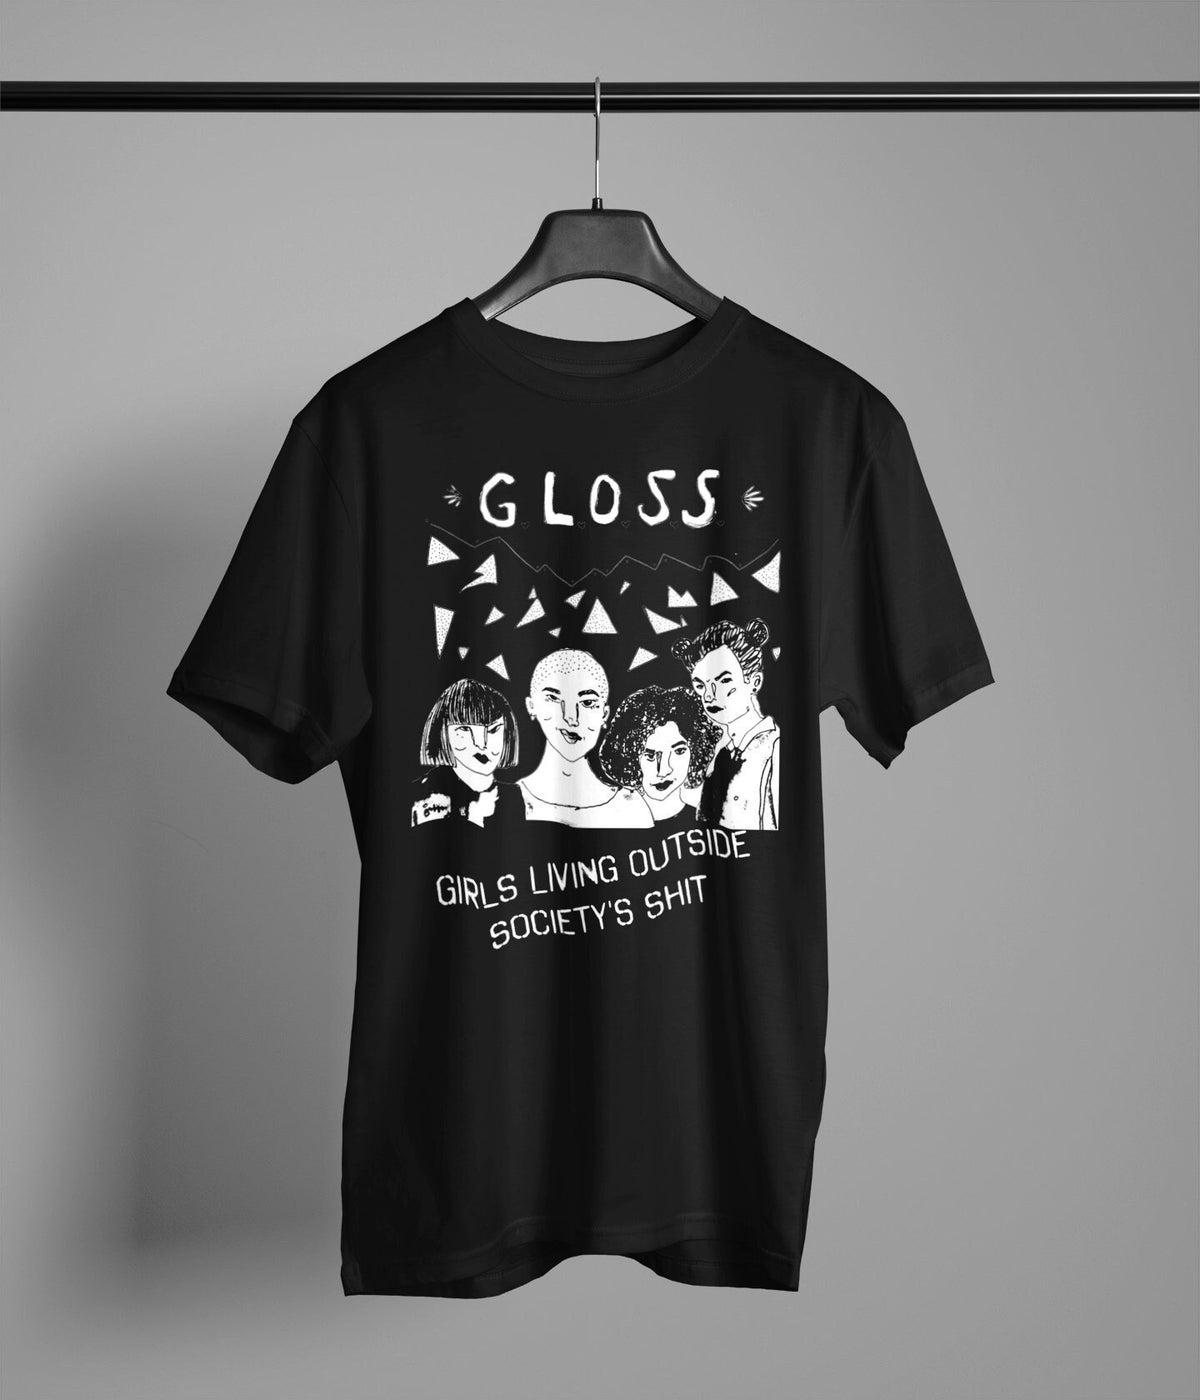 G.l.o.s.s. Trans-feminist Hardcore Punk Band T-shirt Fans Gifts - Apparel, Mug, Home Decor - Perfect Gift For Everyone